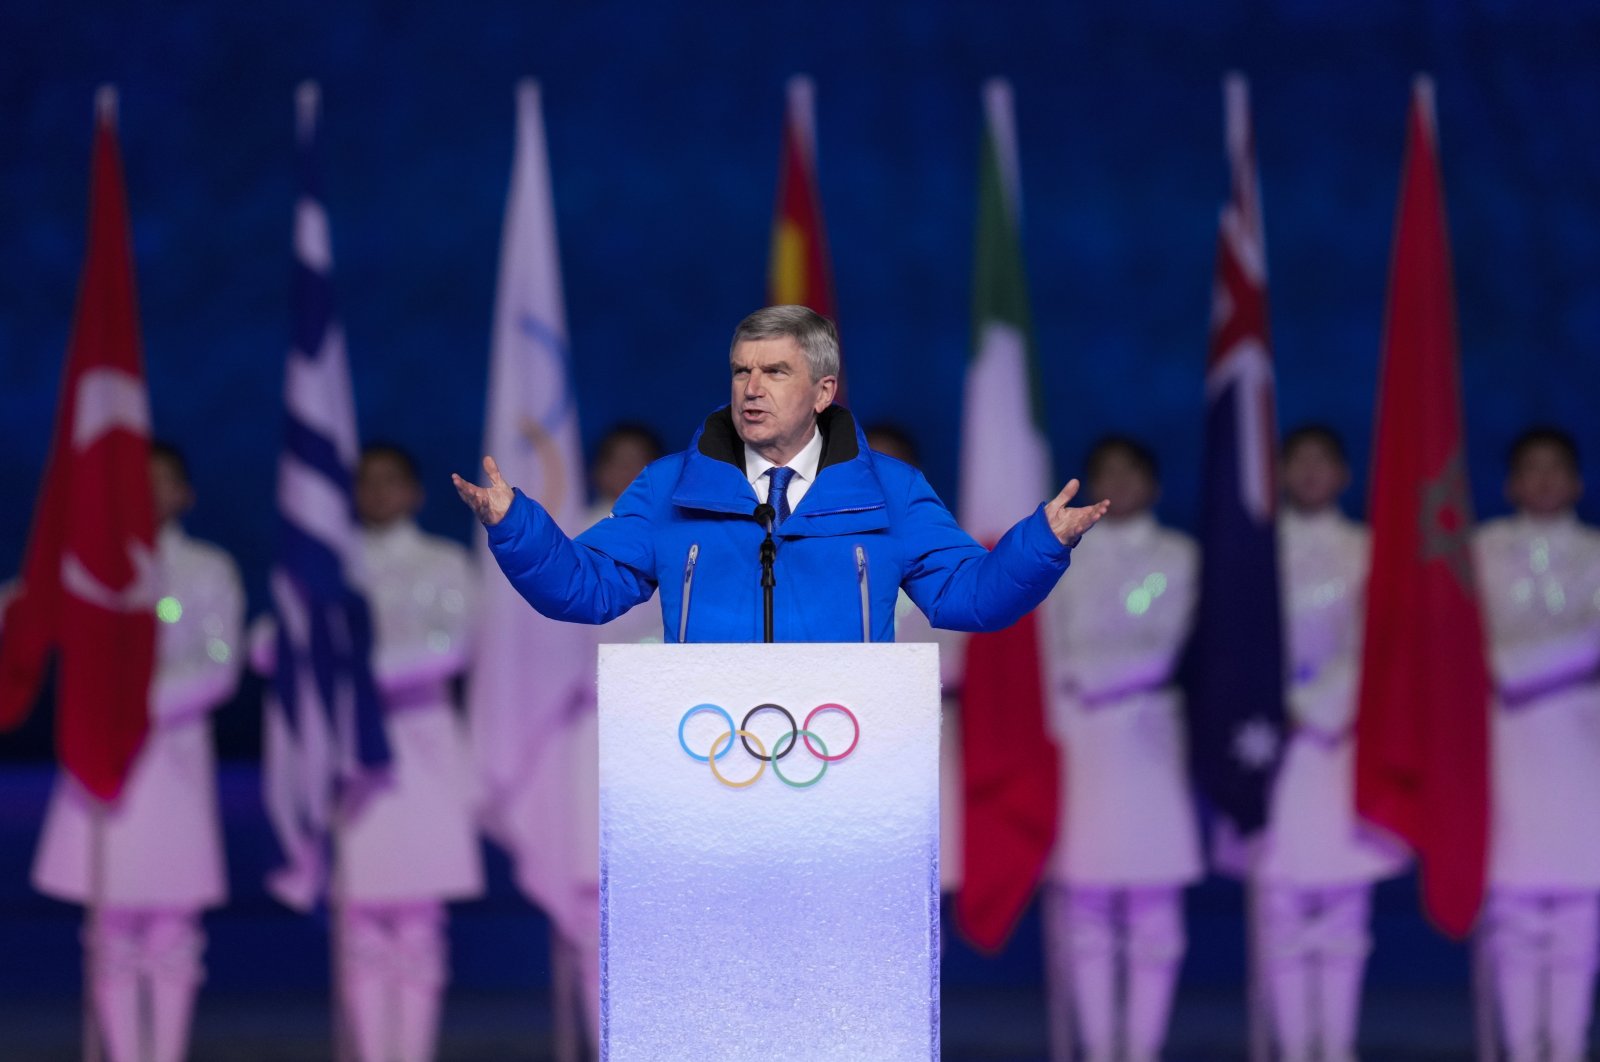 IOC President Thomas Bach speaks during the Beijing Winter Games closing ceremony, Beijing, China, Feb. 20, 2022. (AFP Photo)